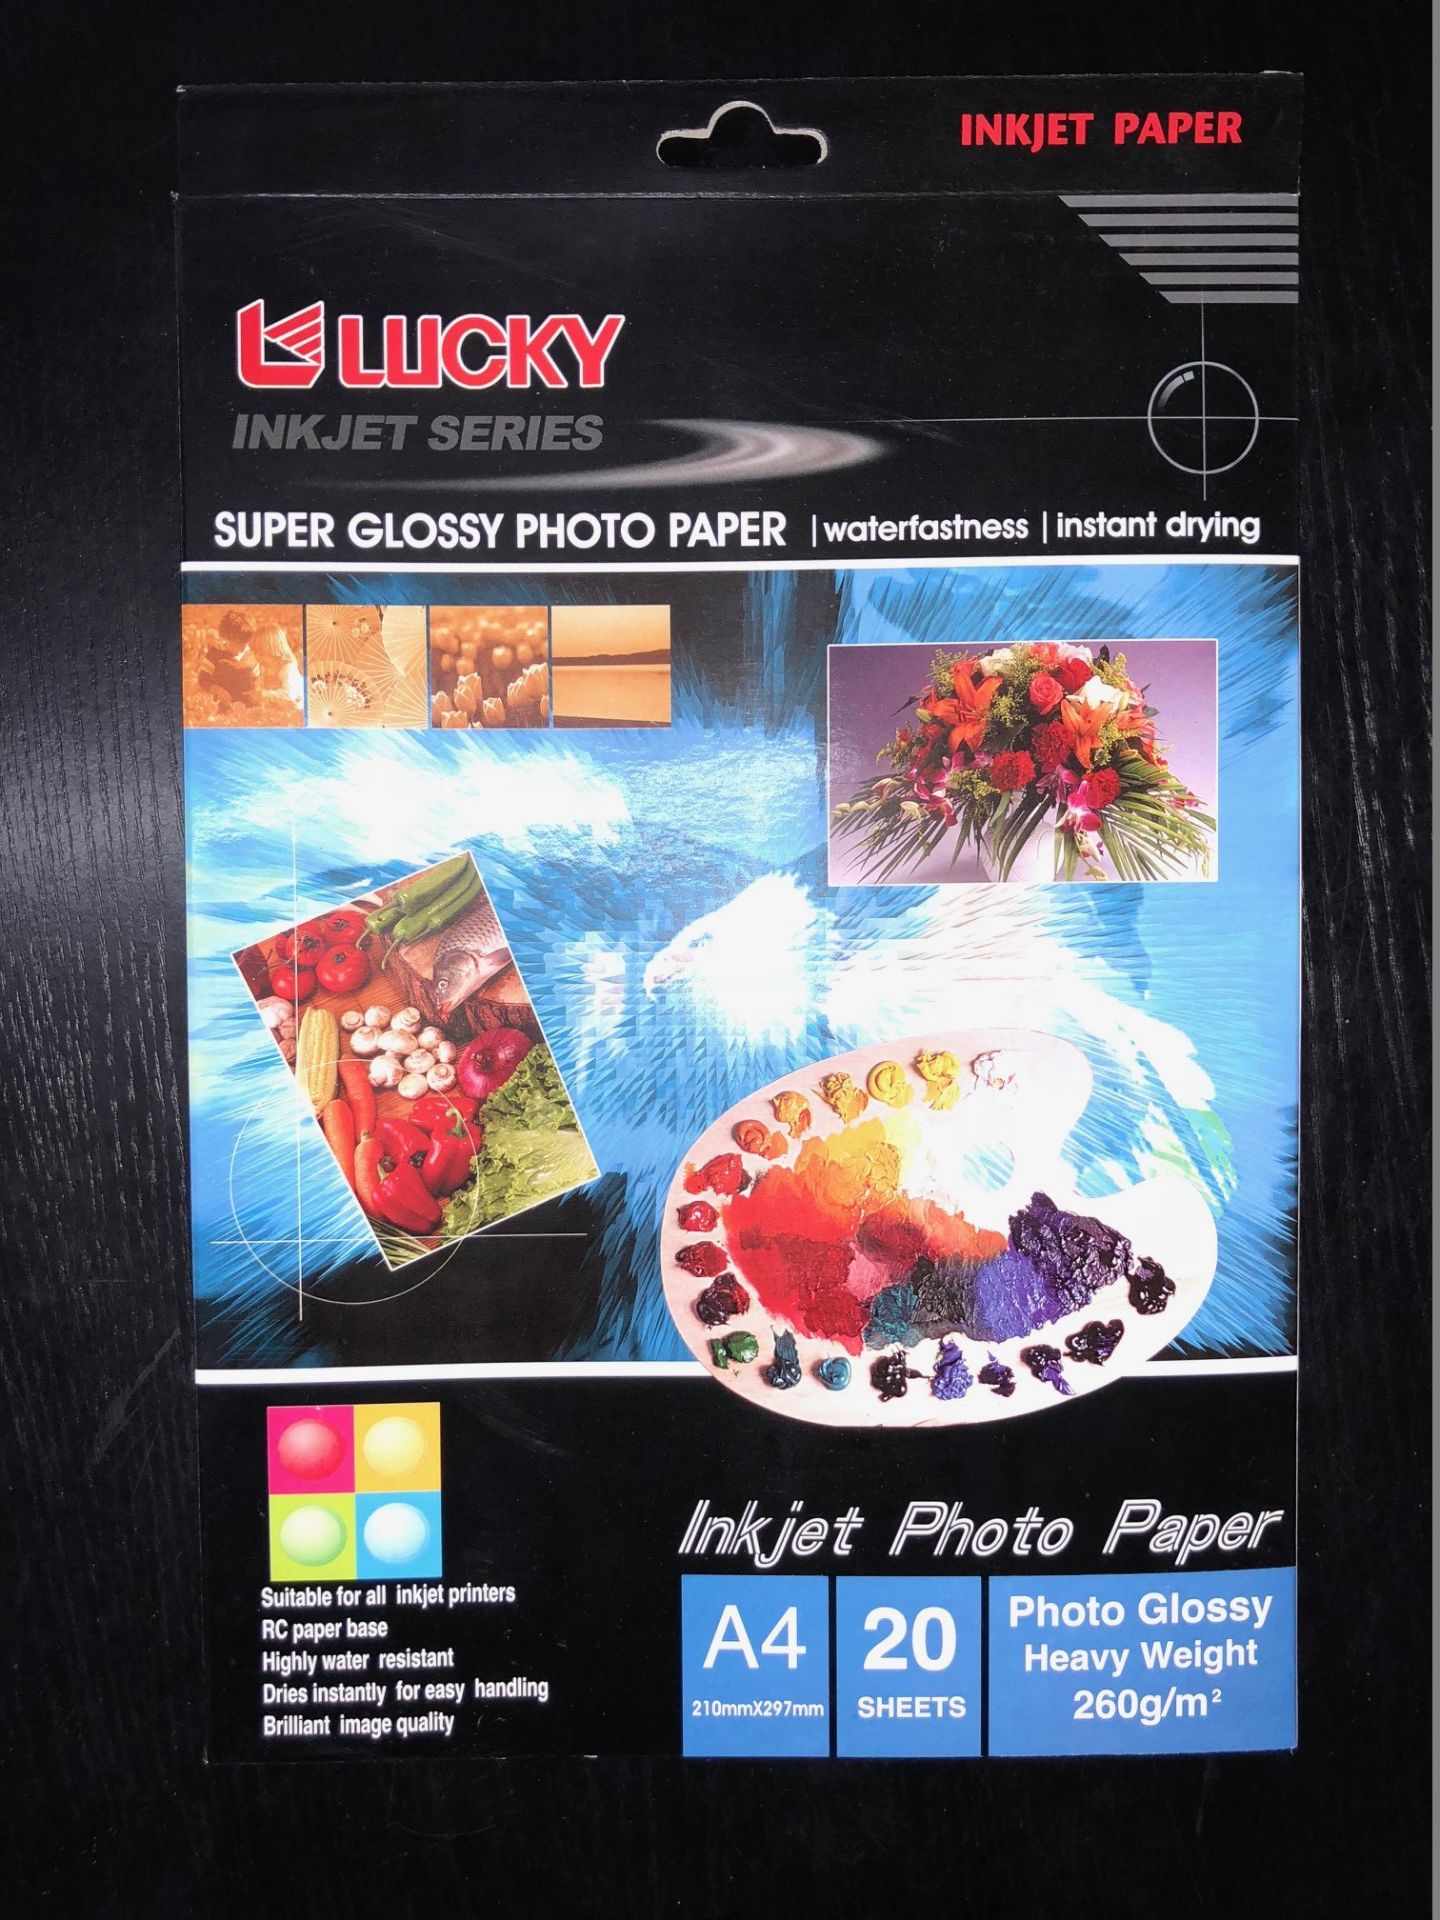 54 x Packs of 260gsm Super Glossy Photo Paper (RRP £5.99 Per Pack - Massive Retail Value)